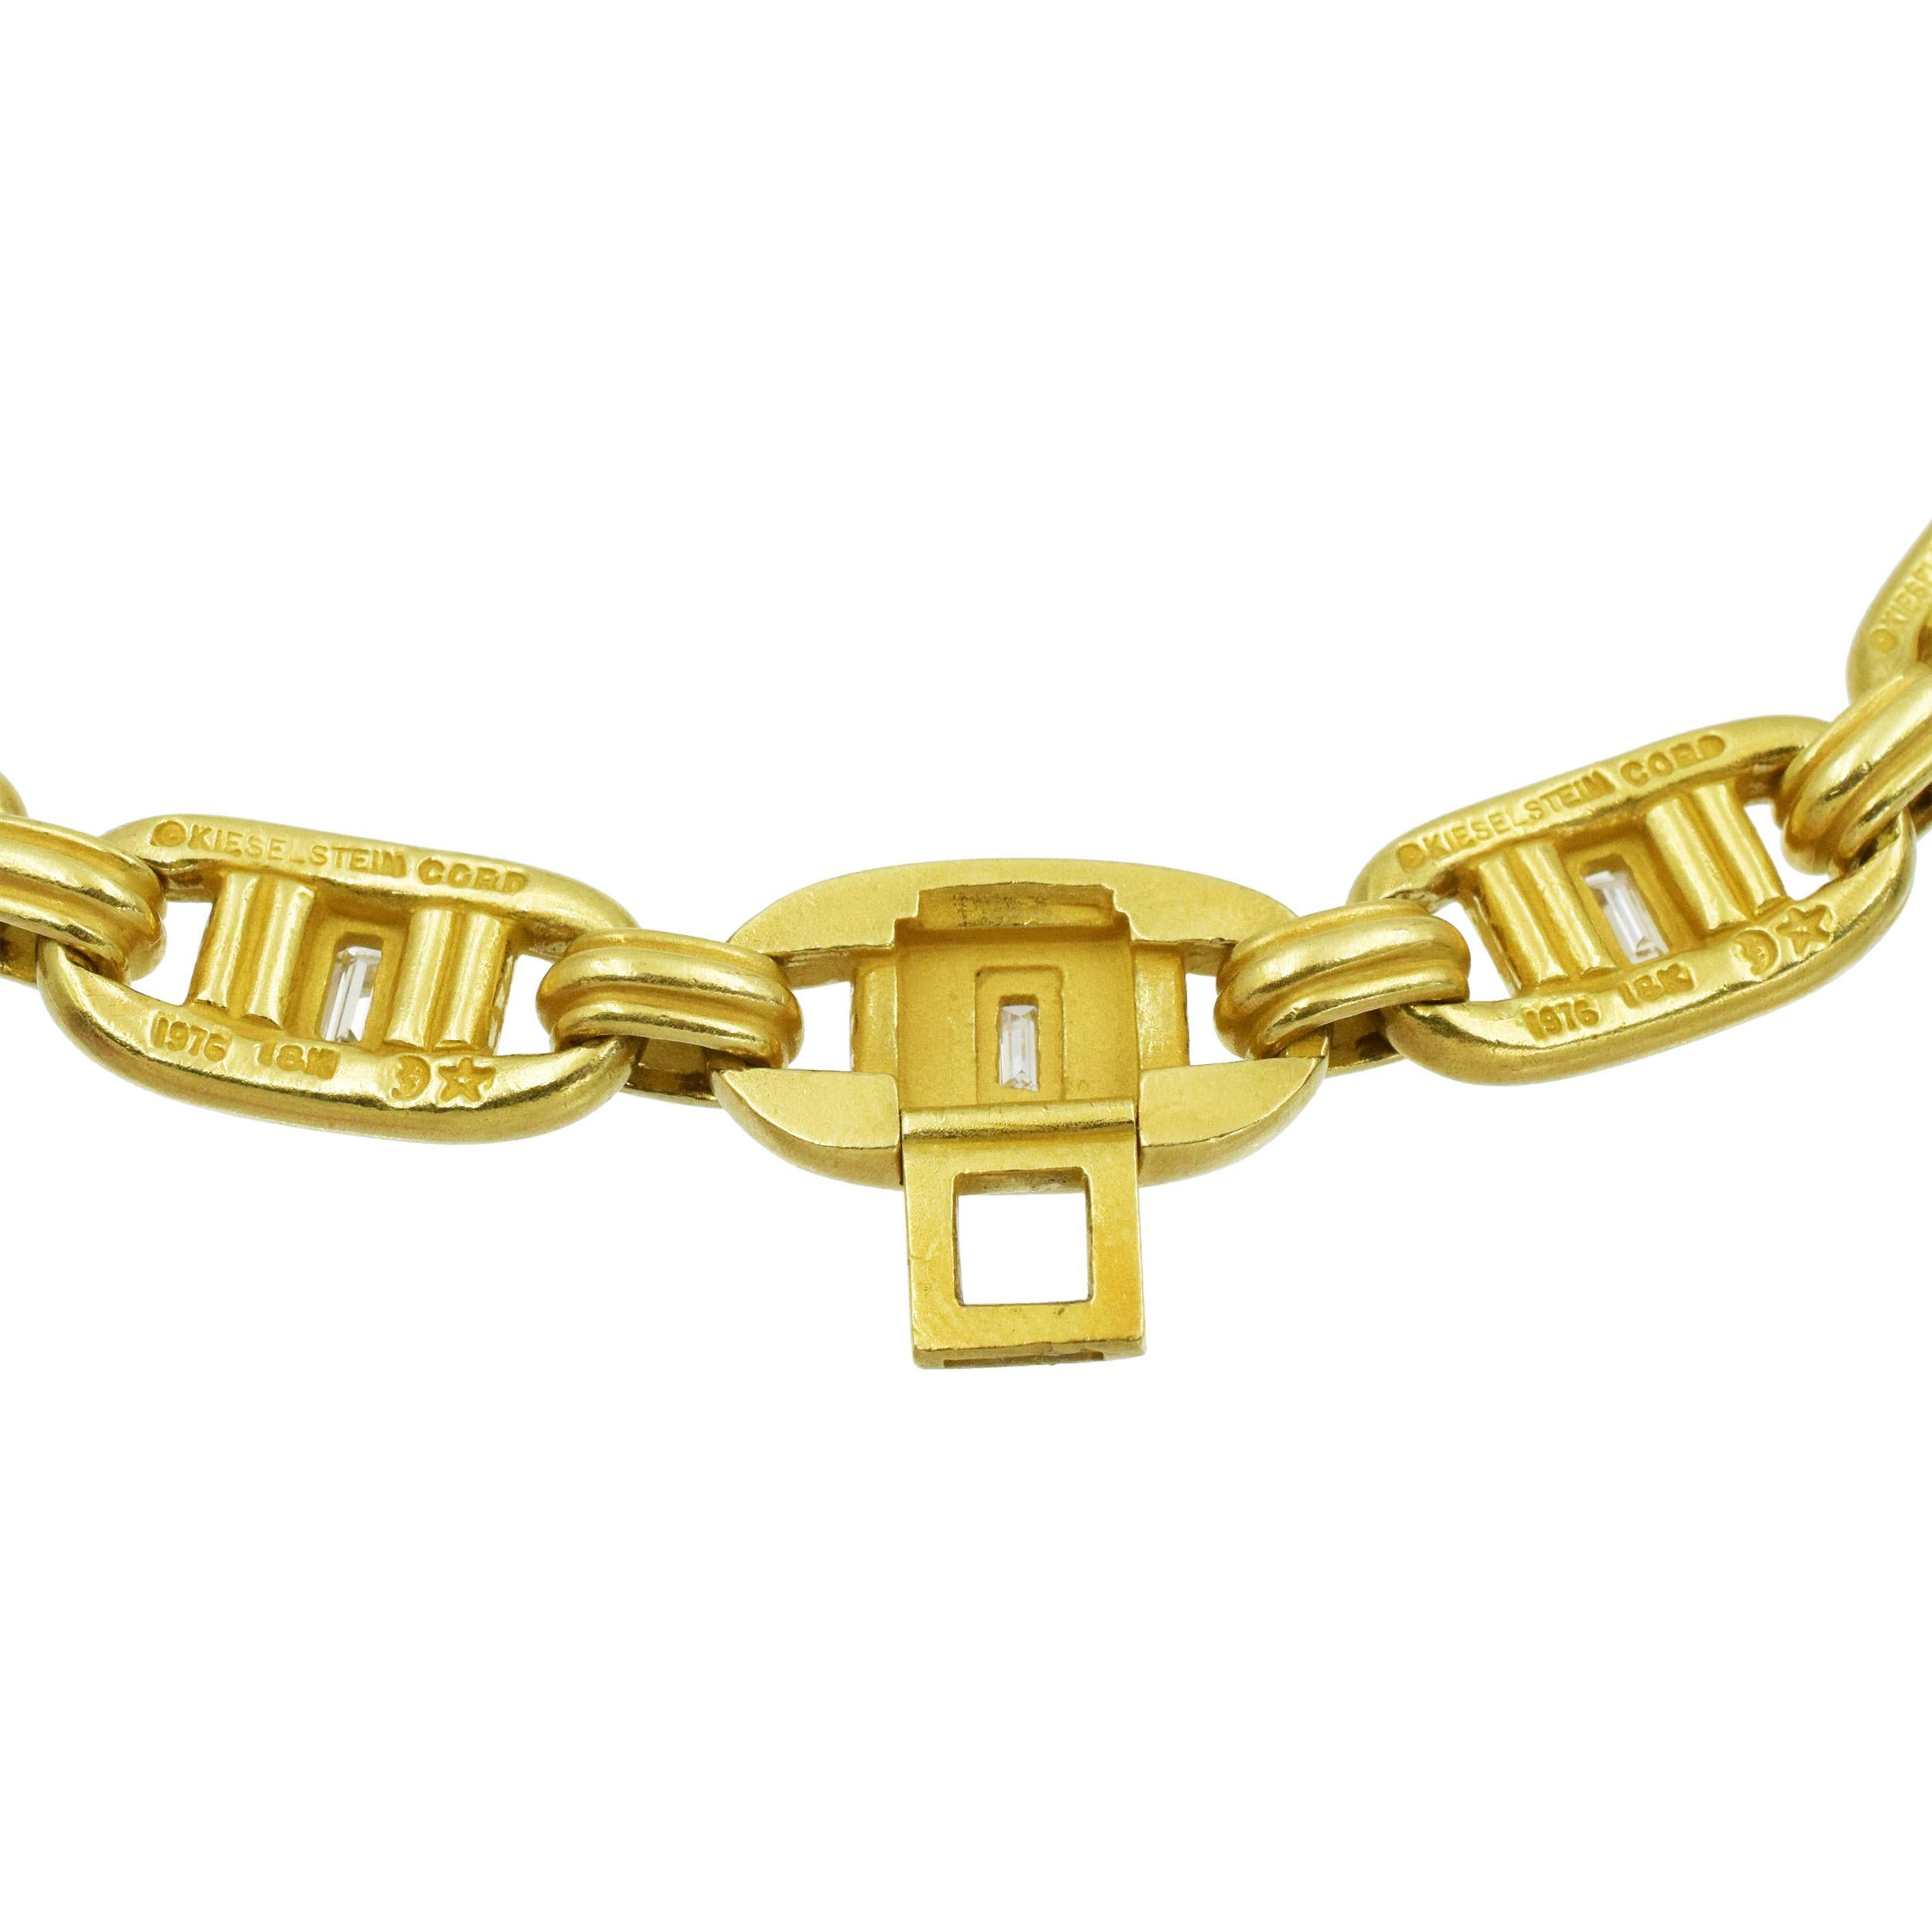 Kieselstein-Cord Gold and Damond Necklace  For Sale 1